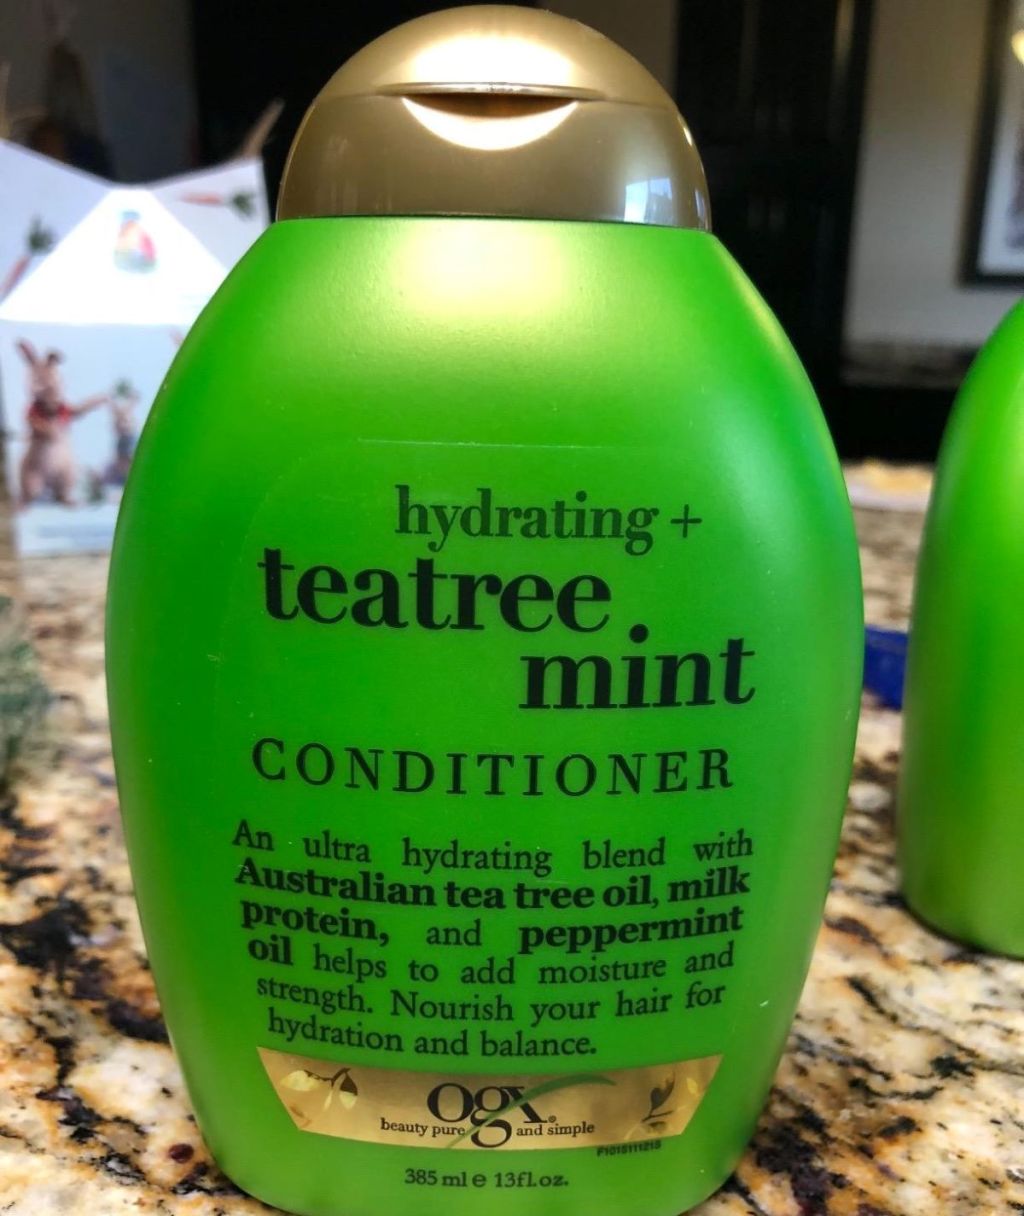 Green bottle of OGX conditioner on a counter